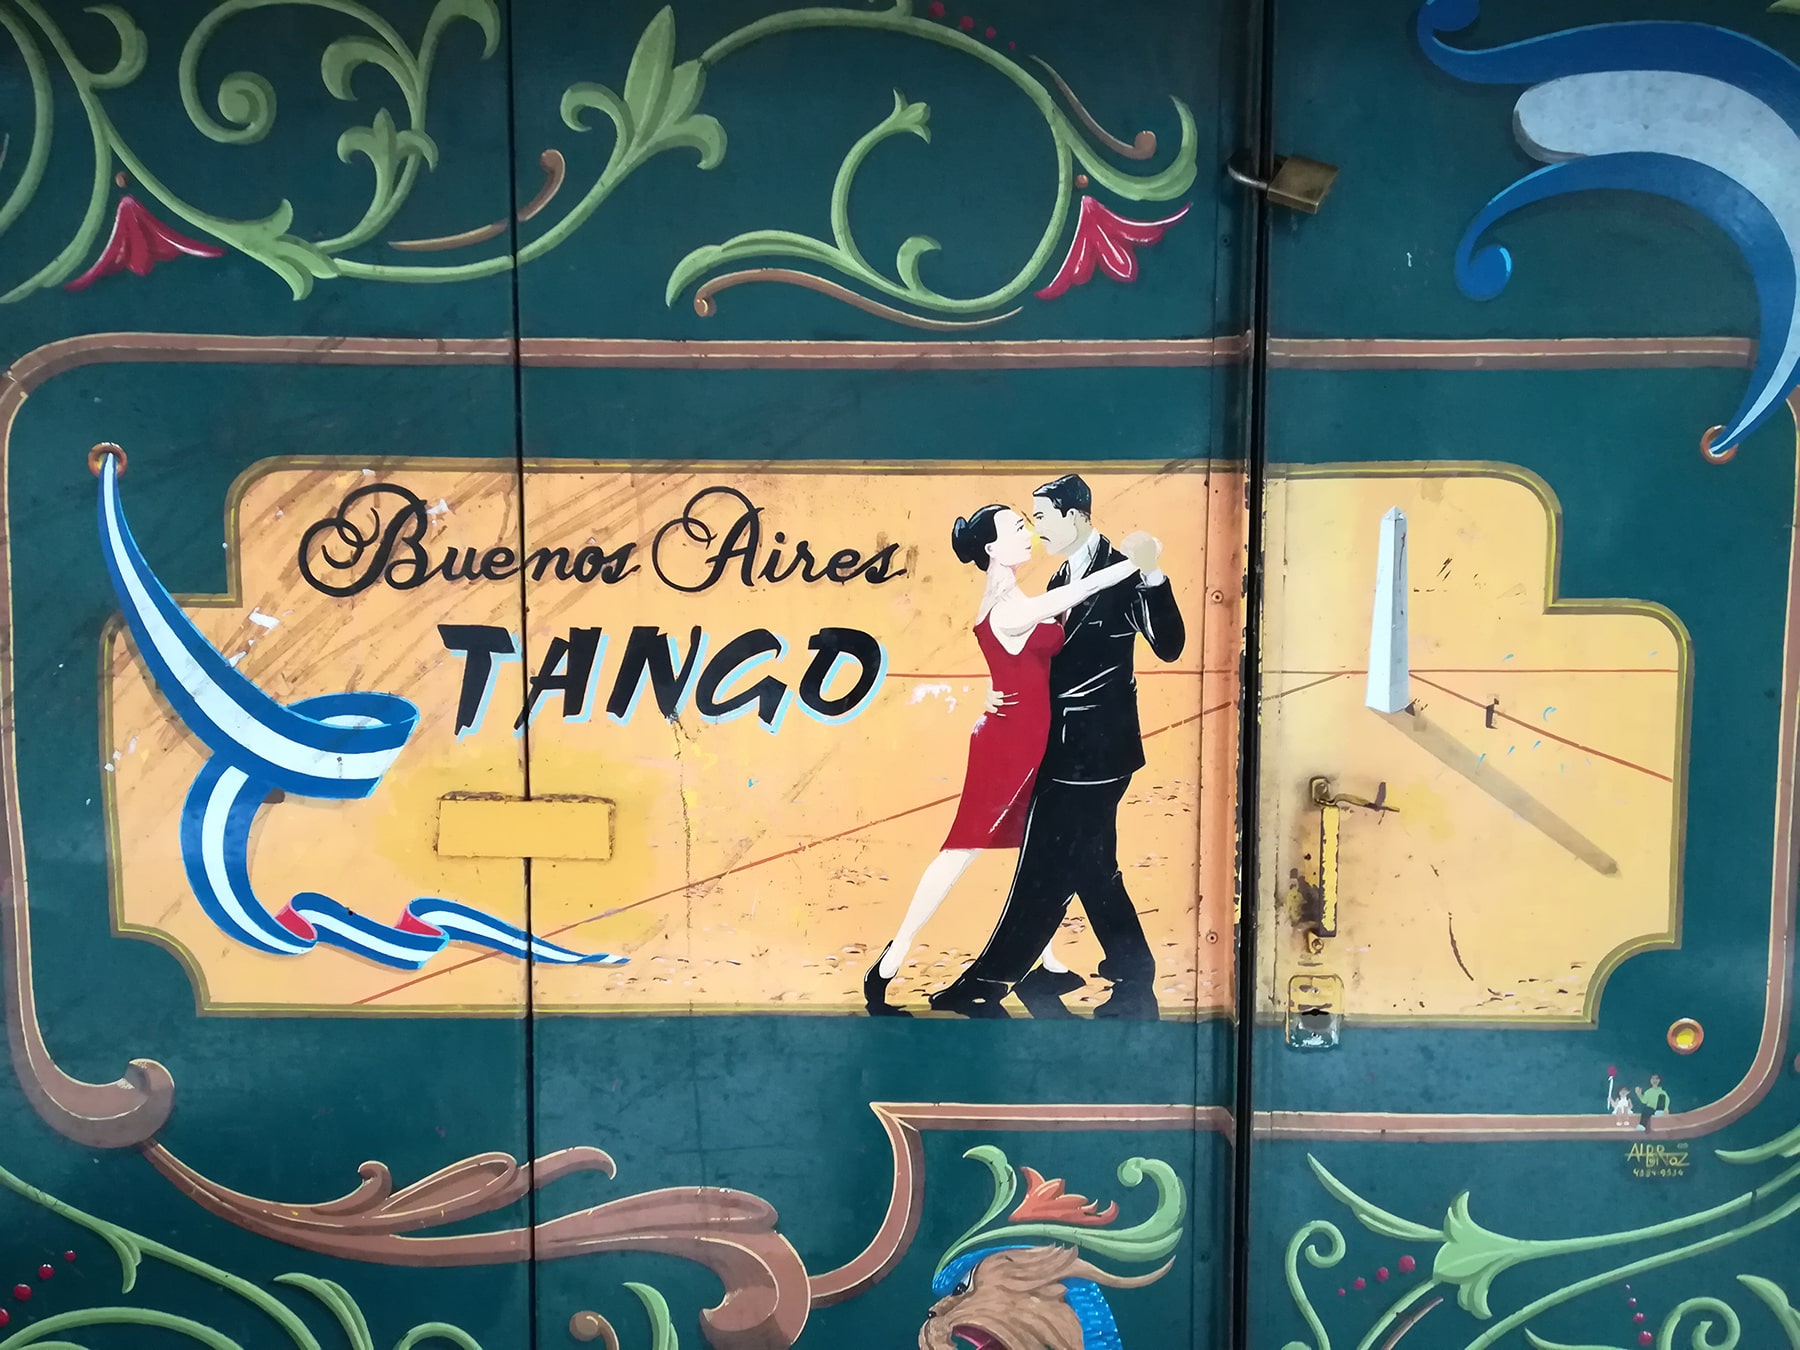 Tango wall painting, Buenos Aires